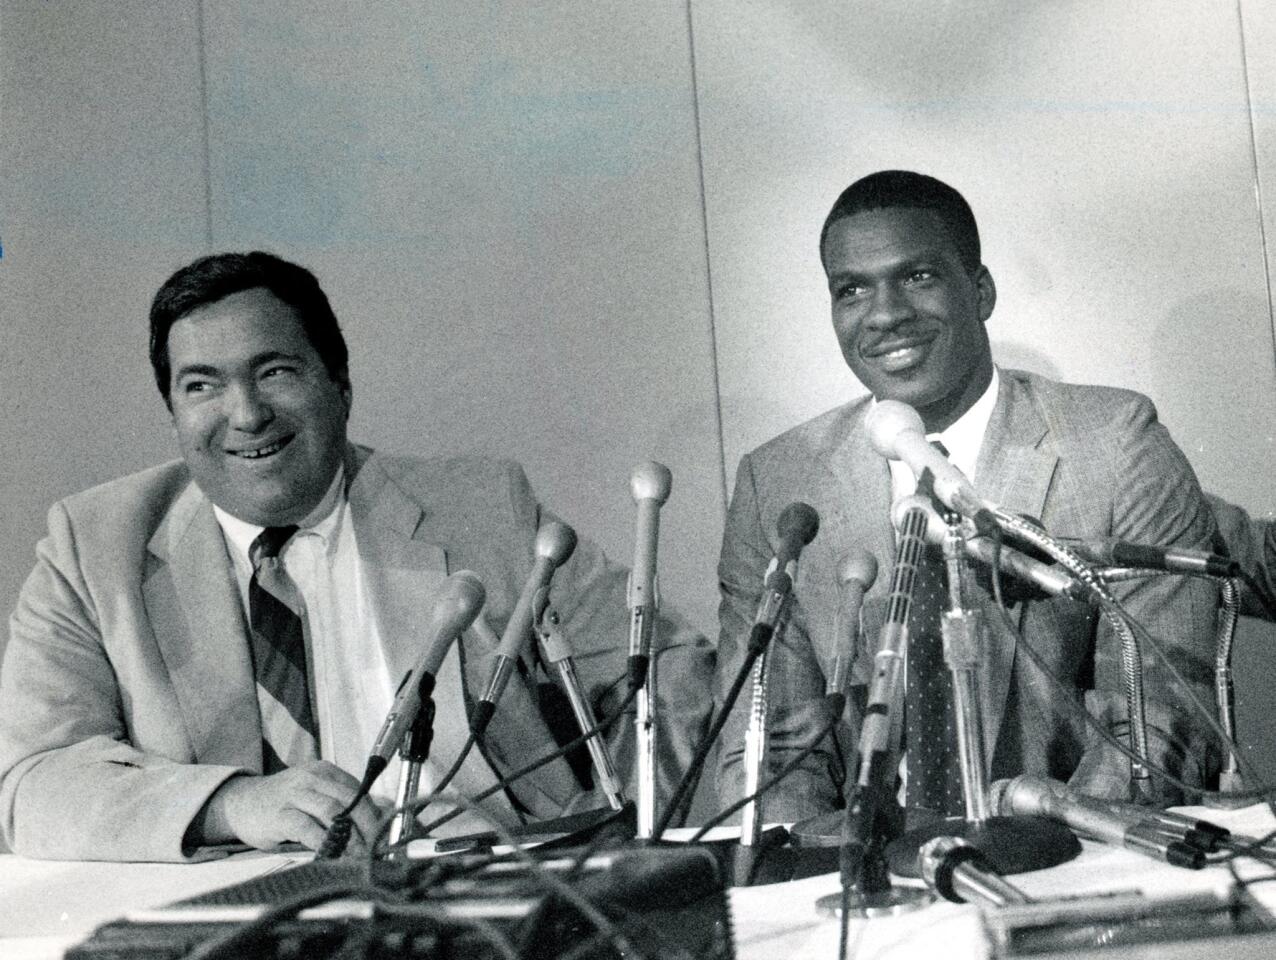 (Sept. 26, 1985) Bull' vice president Jerry Krause shares a laugh with Charles Oakley at a press conference on Sept. 26, 1985. Oakley signed a three-year contract.